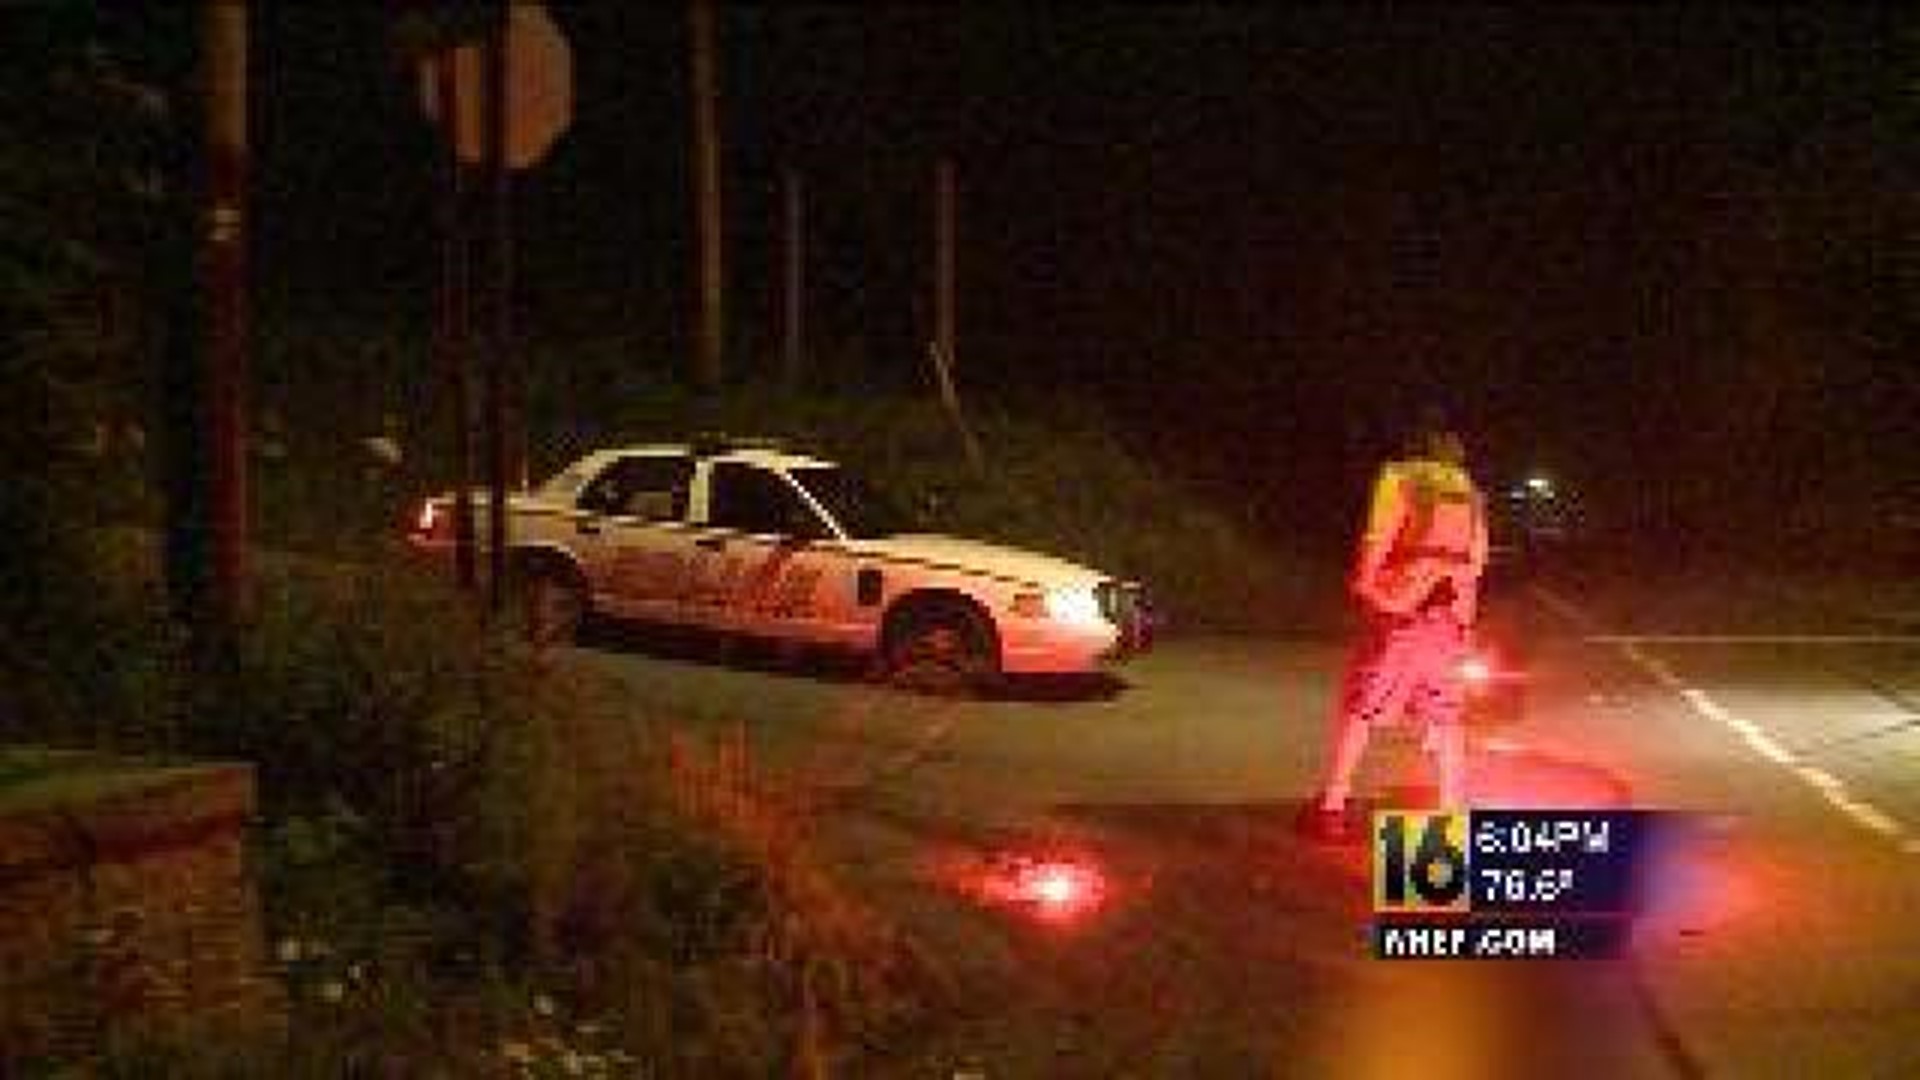 Shots Fired in Luzerne County